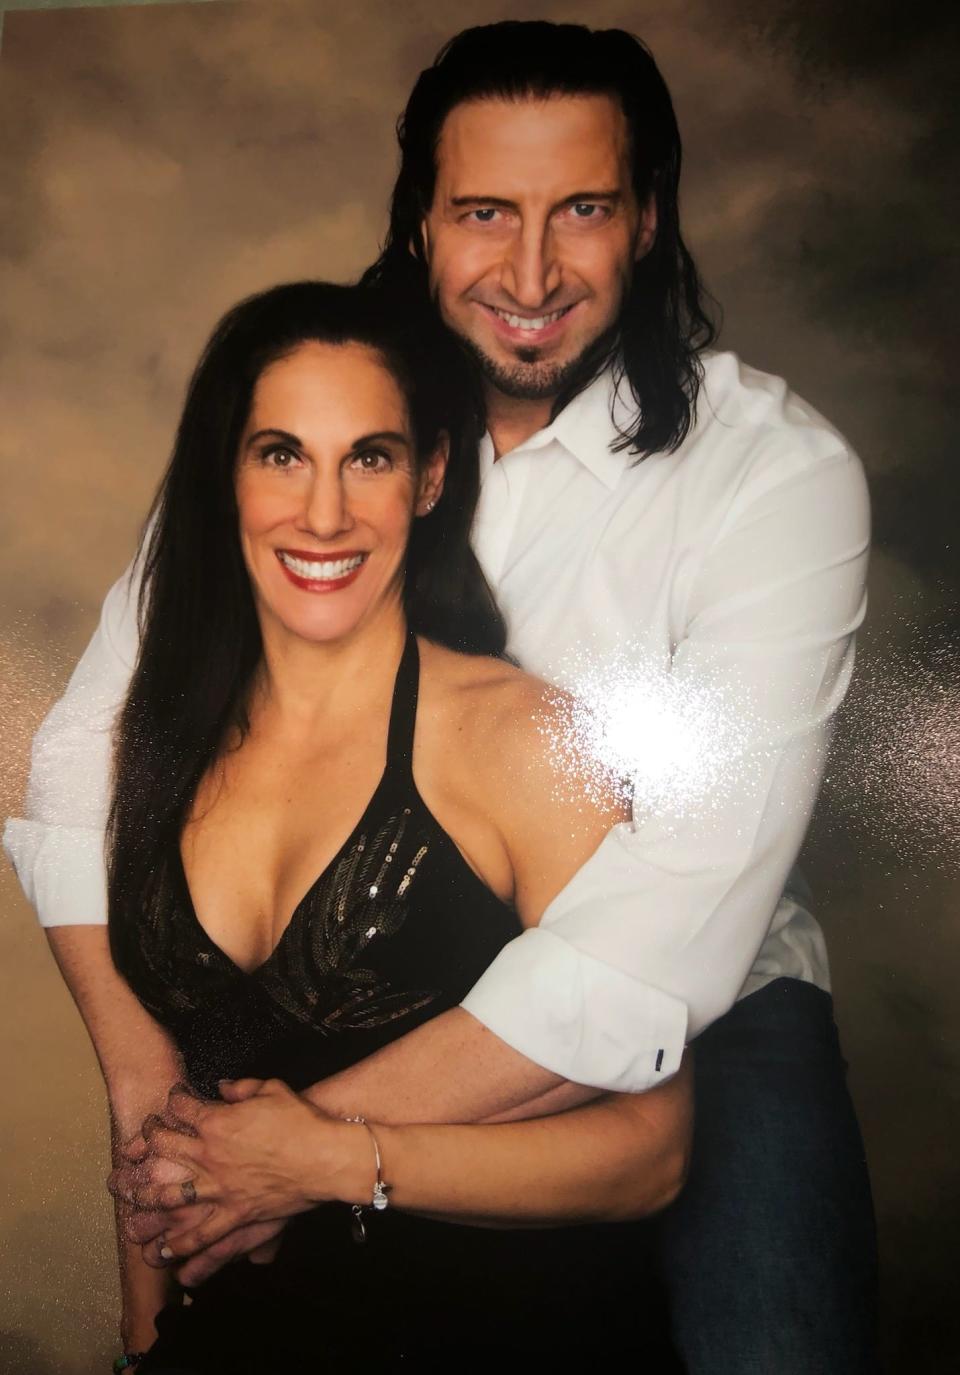 Chris Ford and his wife Dina both work at Raising the Bar Rehabilitation and Fitness in East Rutherford. They're also both professional wrestlers, and they'll be at Barnegat High School
on Saturday.